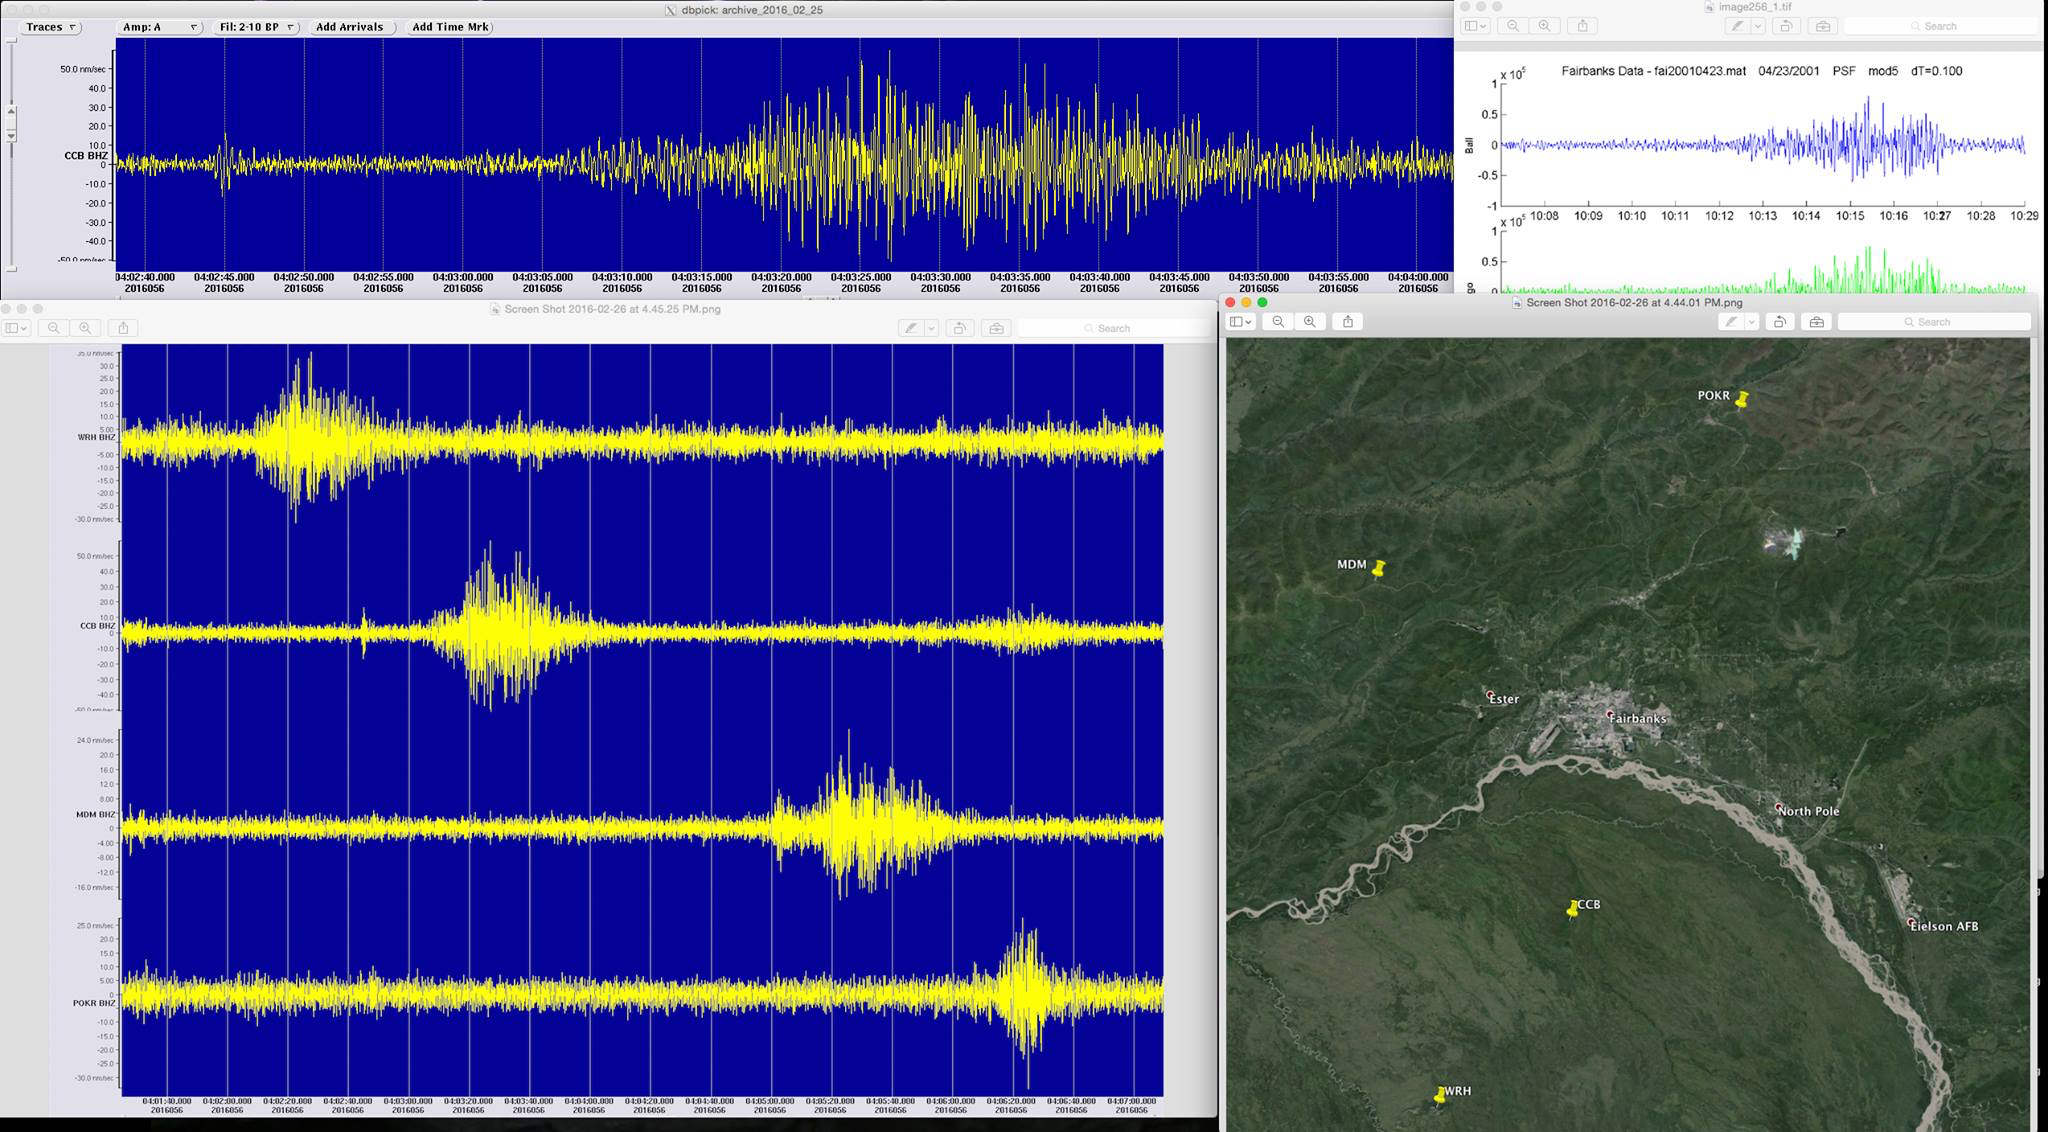 Seismograms of bolide signal and map showing location of 4 seismic stations around Fairbanks that captured the event.